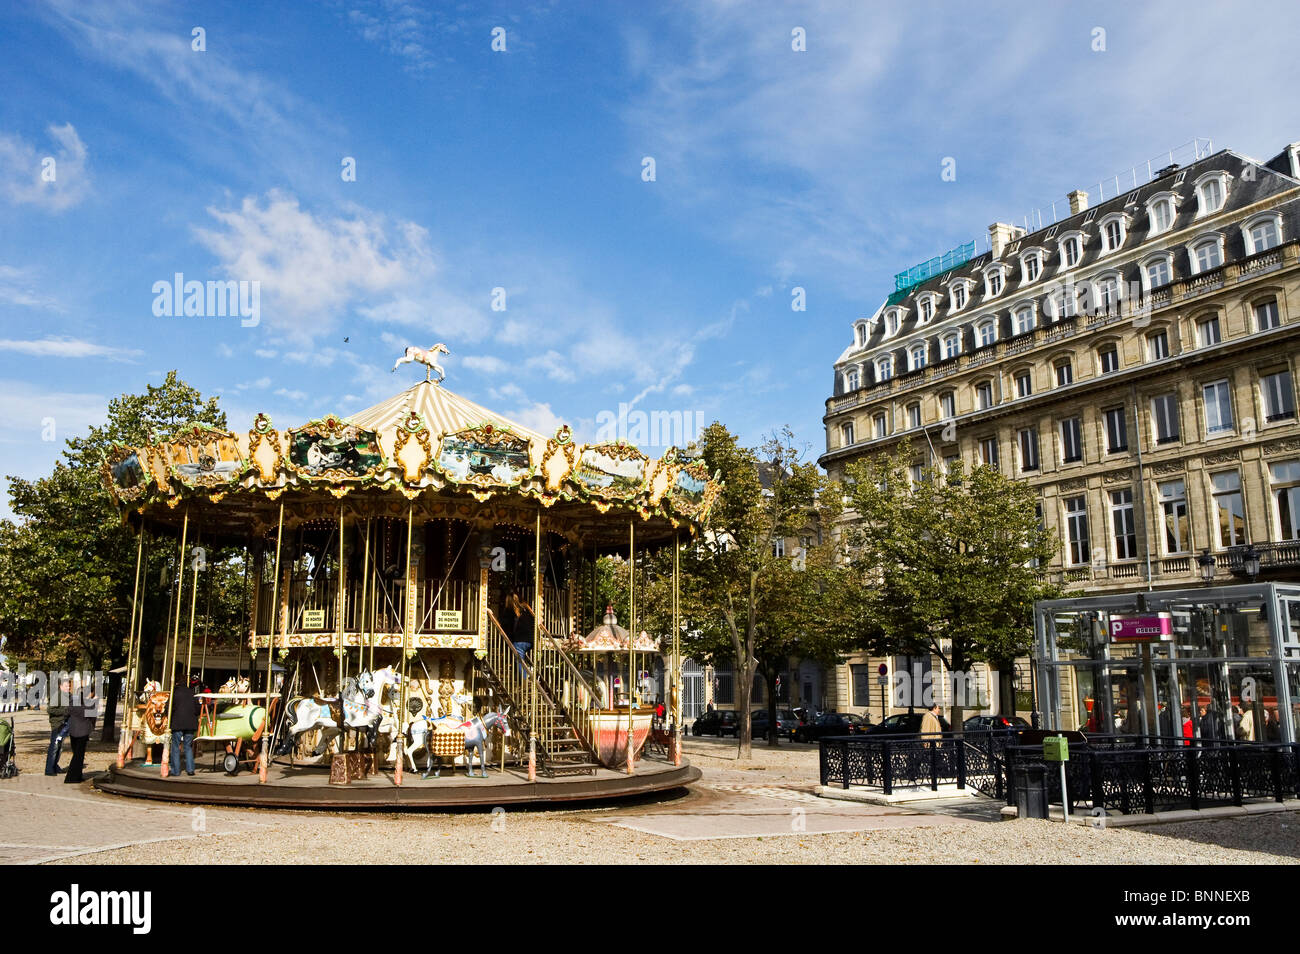 A carousel in Bordeaux city centre, France Stock Photo